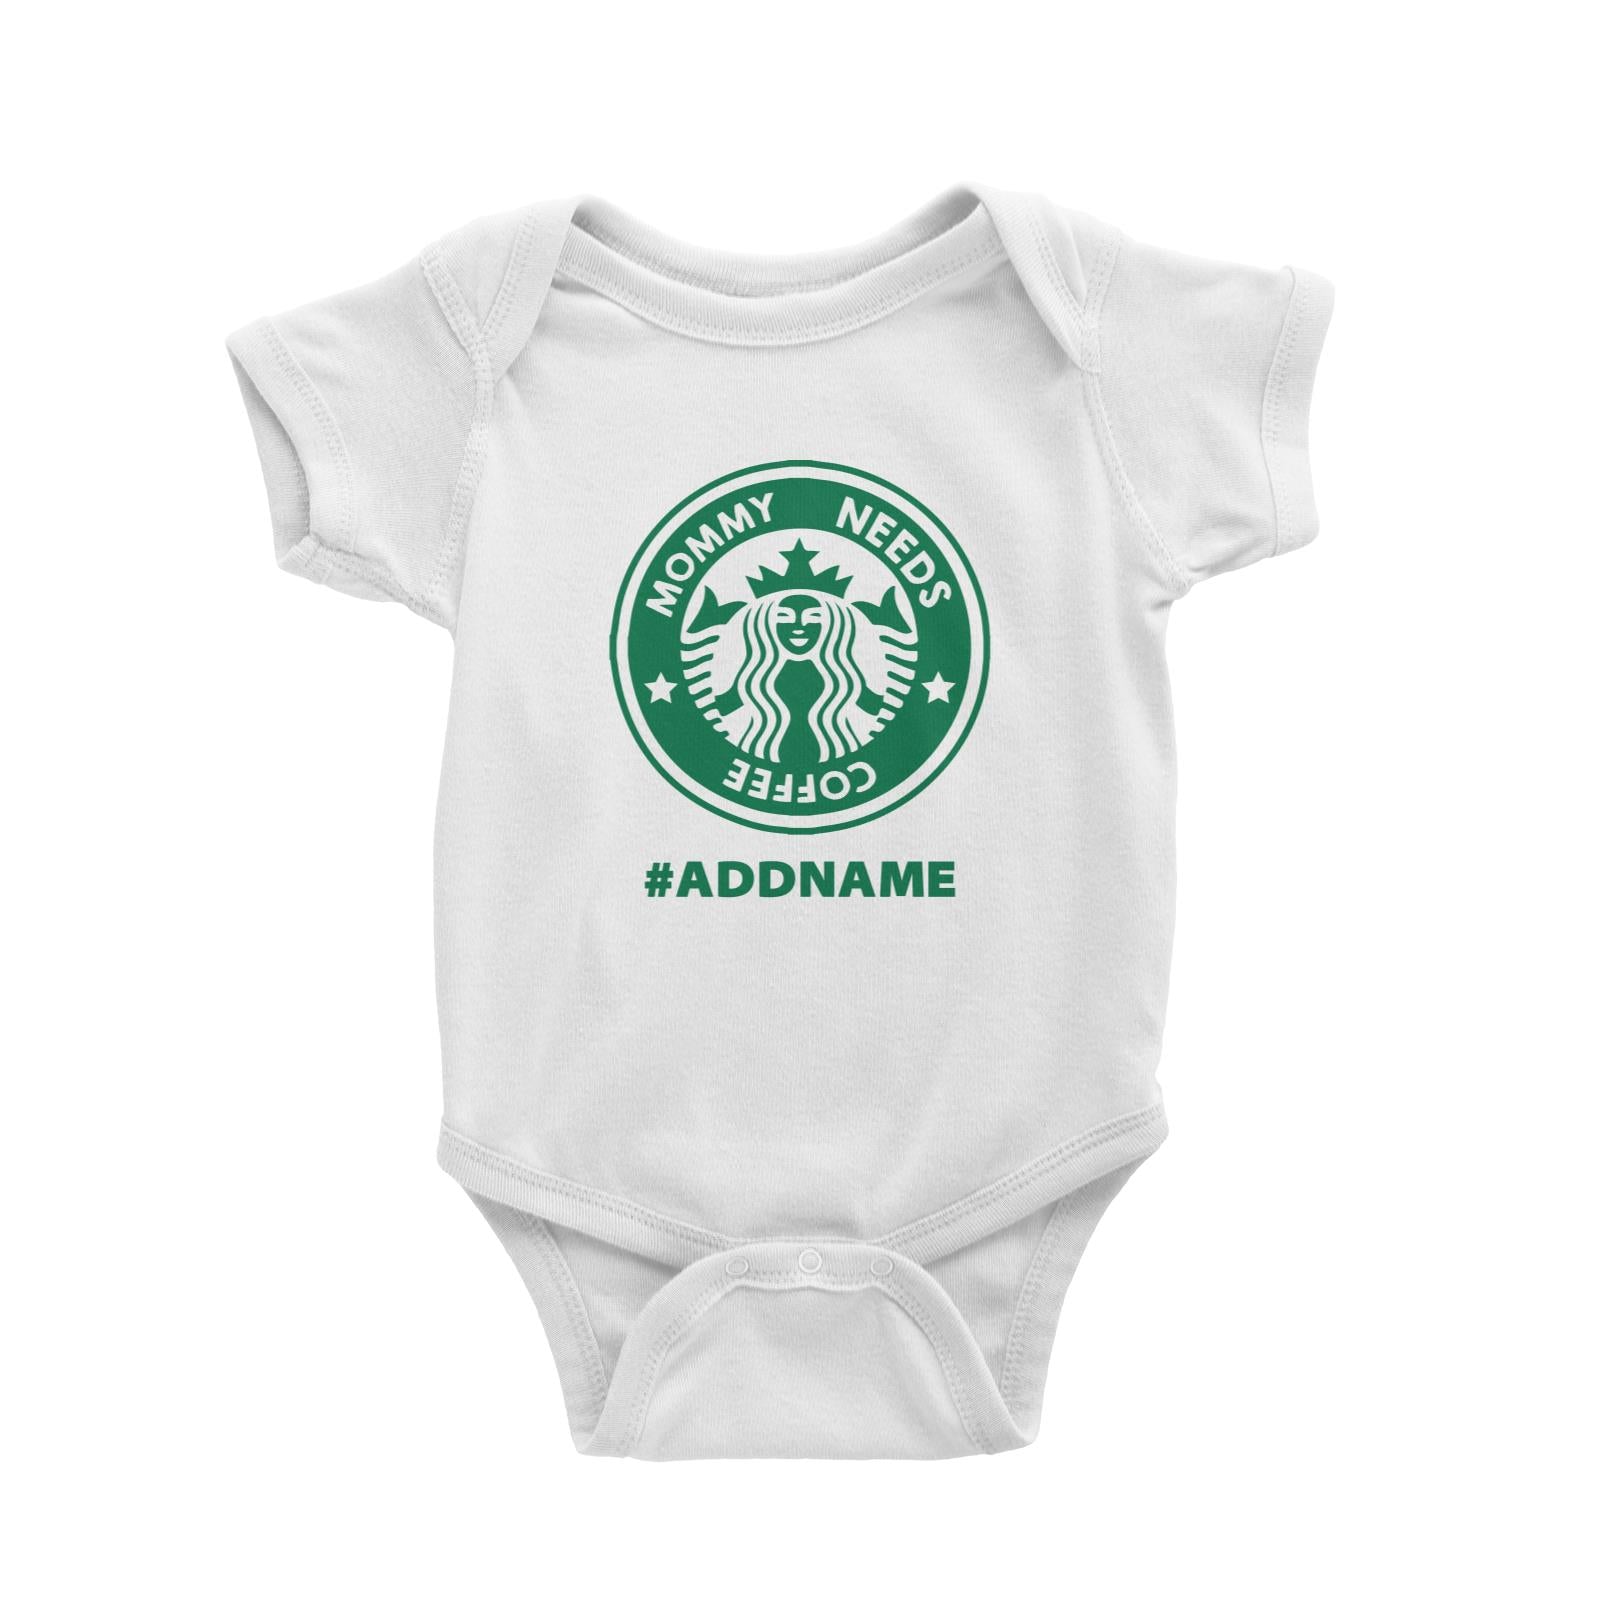 Mommy Needs Coffee White Baby Romper